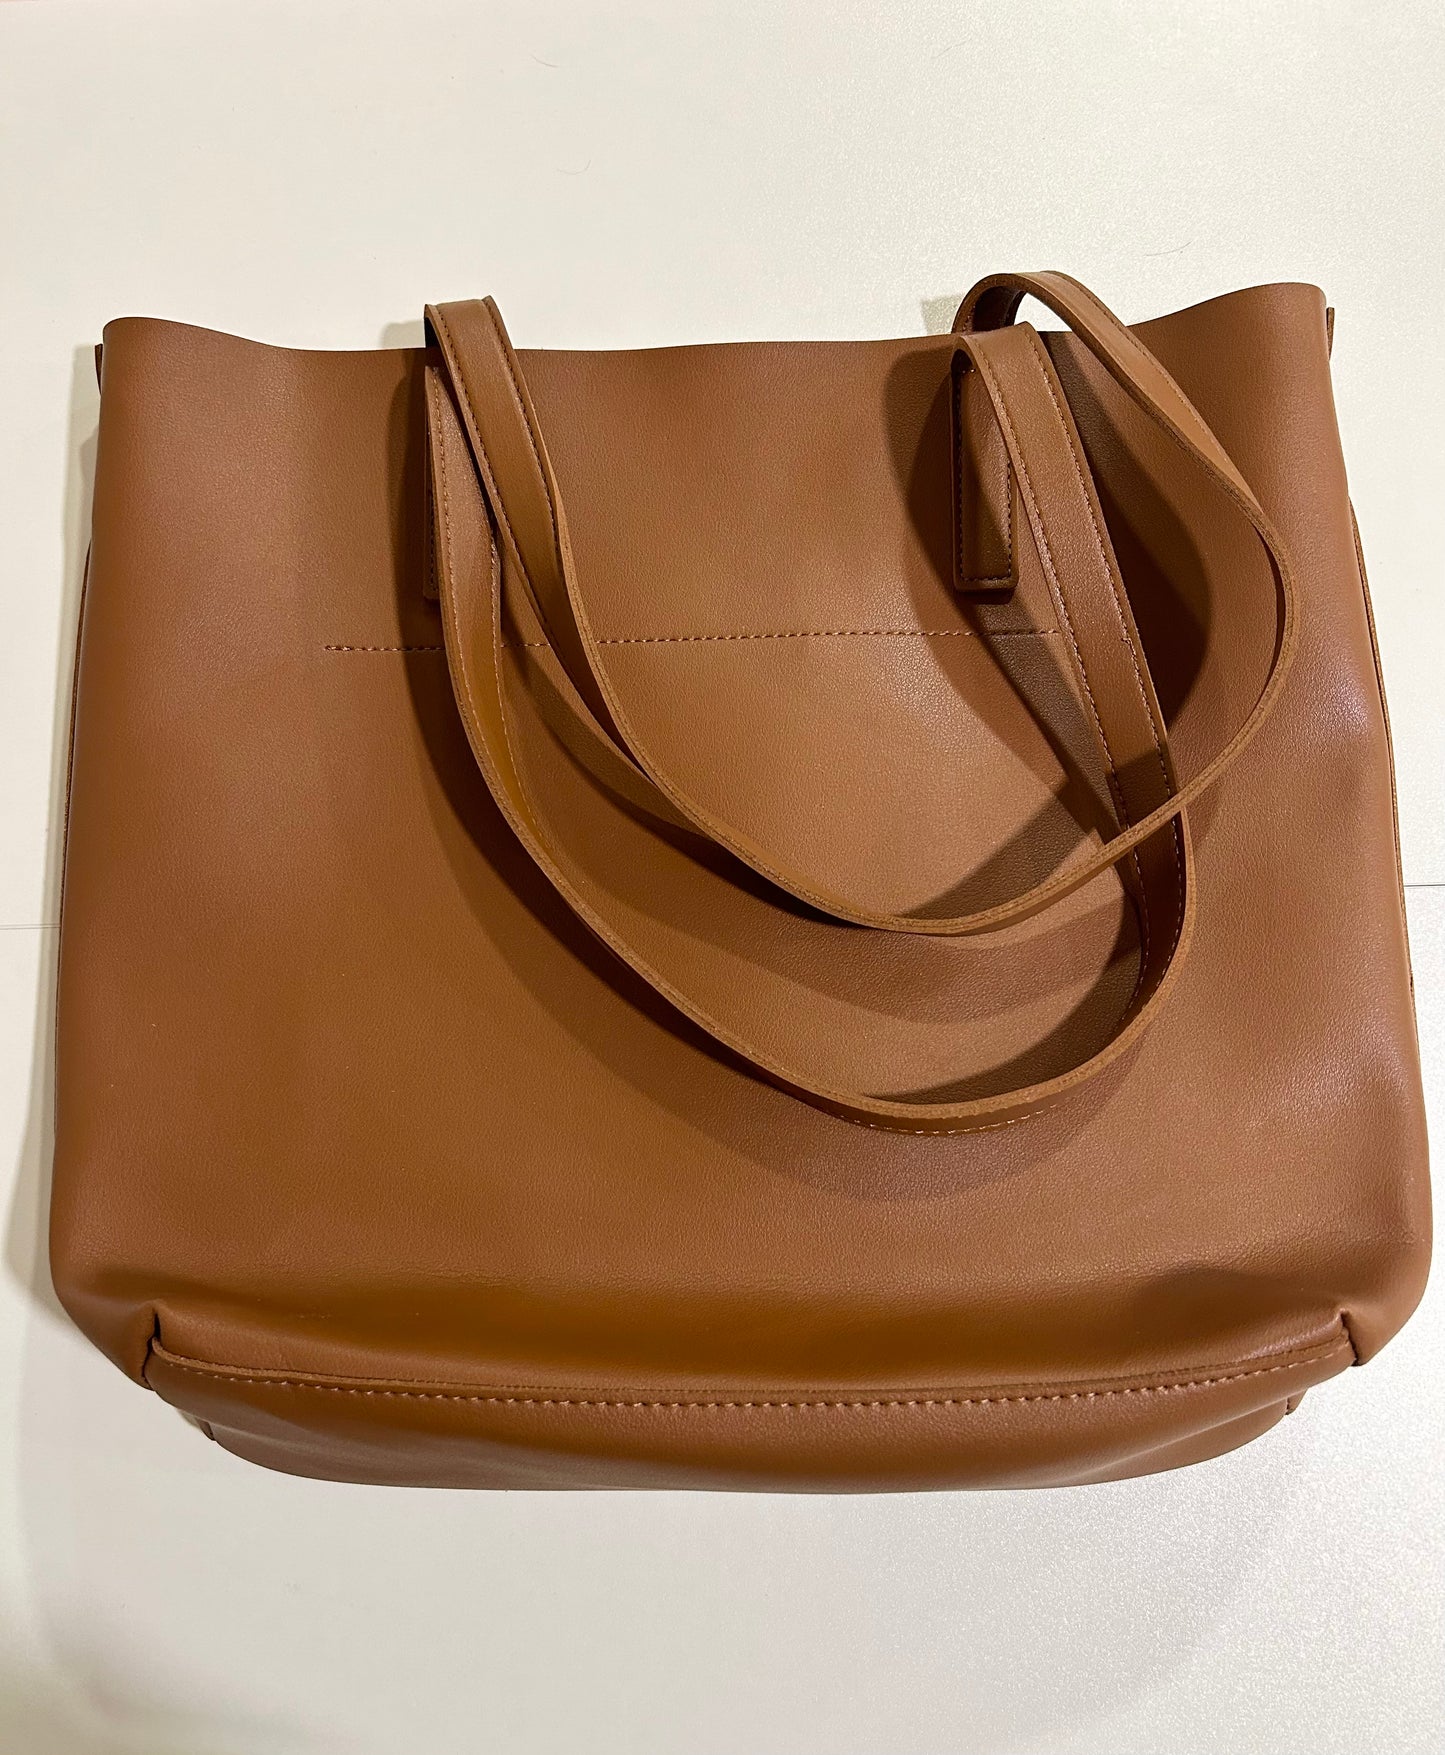 Henny + Lev Tote | NWT | Brown